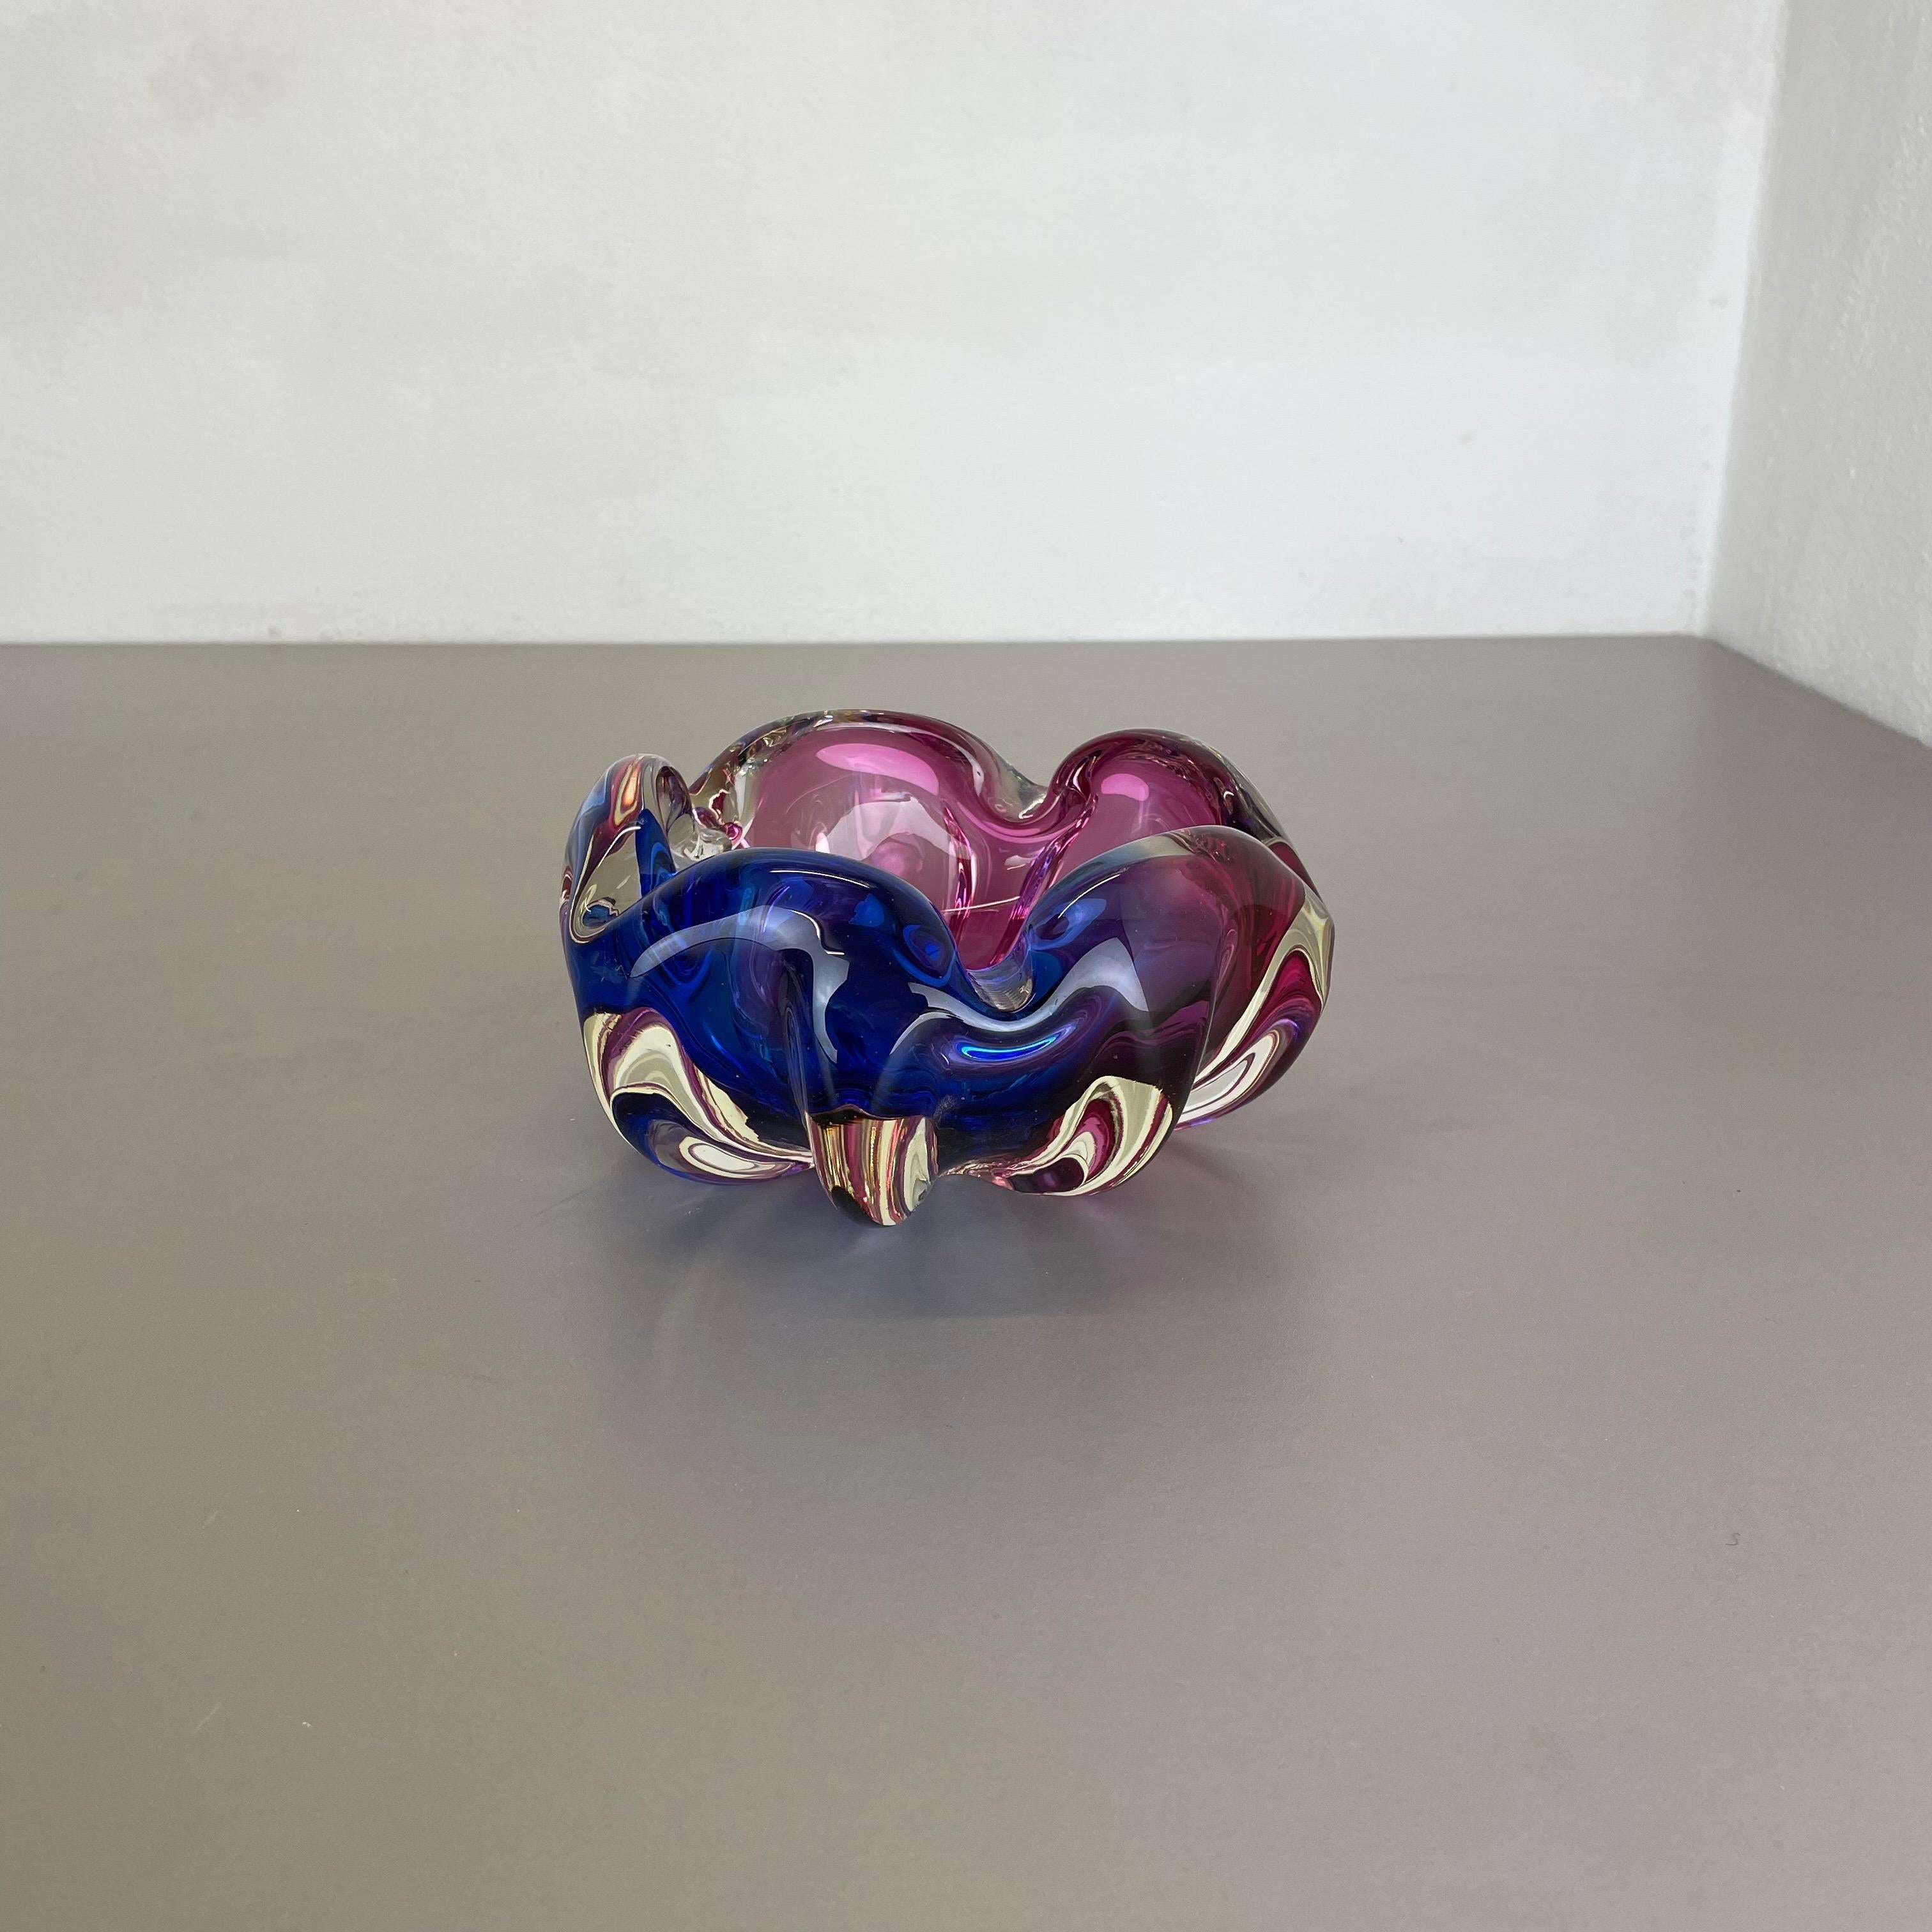 Mid-Century Modern 2, 1 kg Pink-Purple Murano Glass Bowl Element Shell Ashtray Murano, Italy, 1970s For Sale